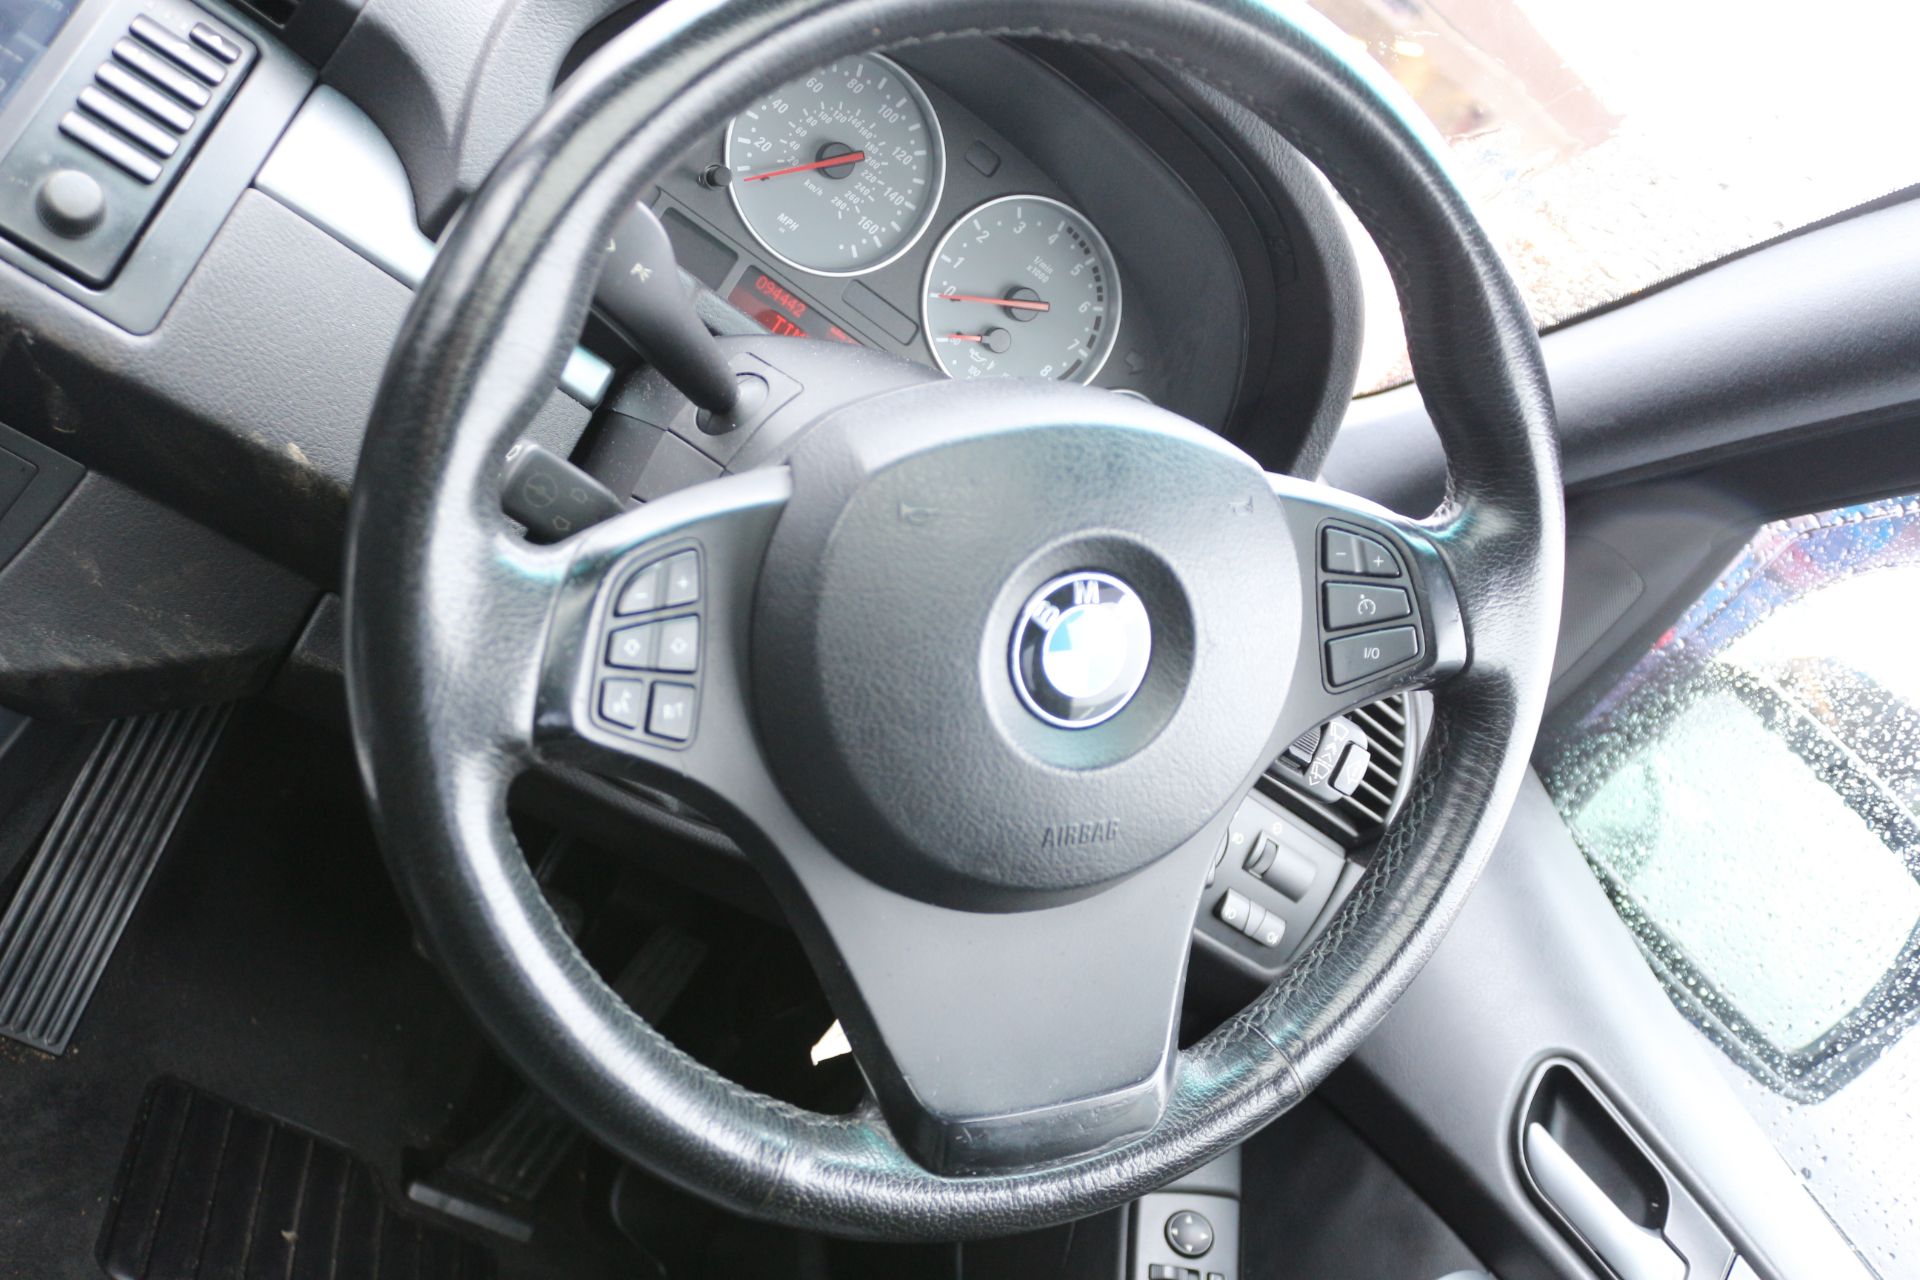 BMW X5, X5 IS FACE LIFT MODEL, HN54 FXZ, 4-8 IS, PETROL, AUTOMATIC, 2004, 5 DOOR, CURRENT RECORDED - Image 11 of 15